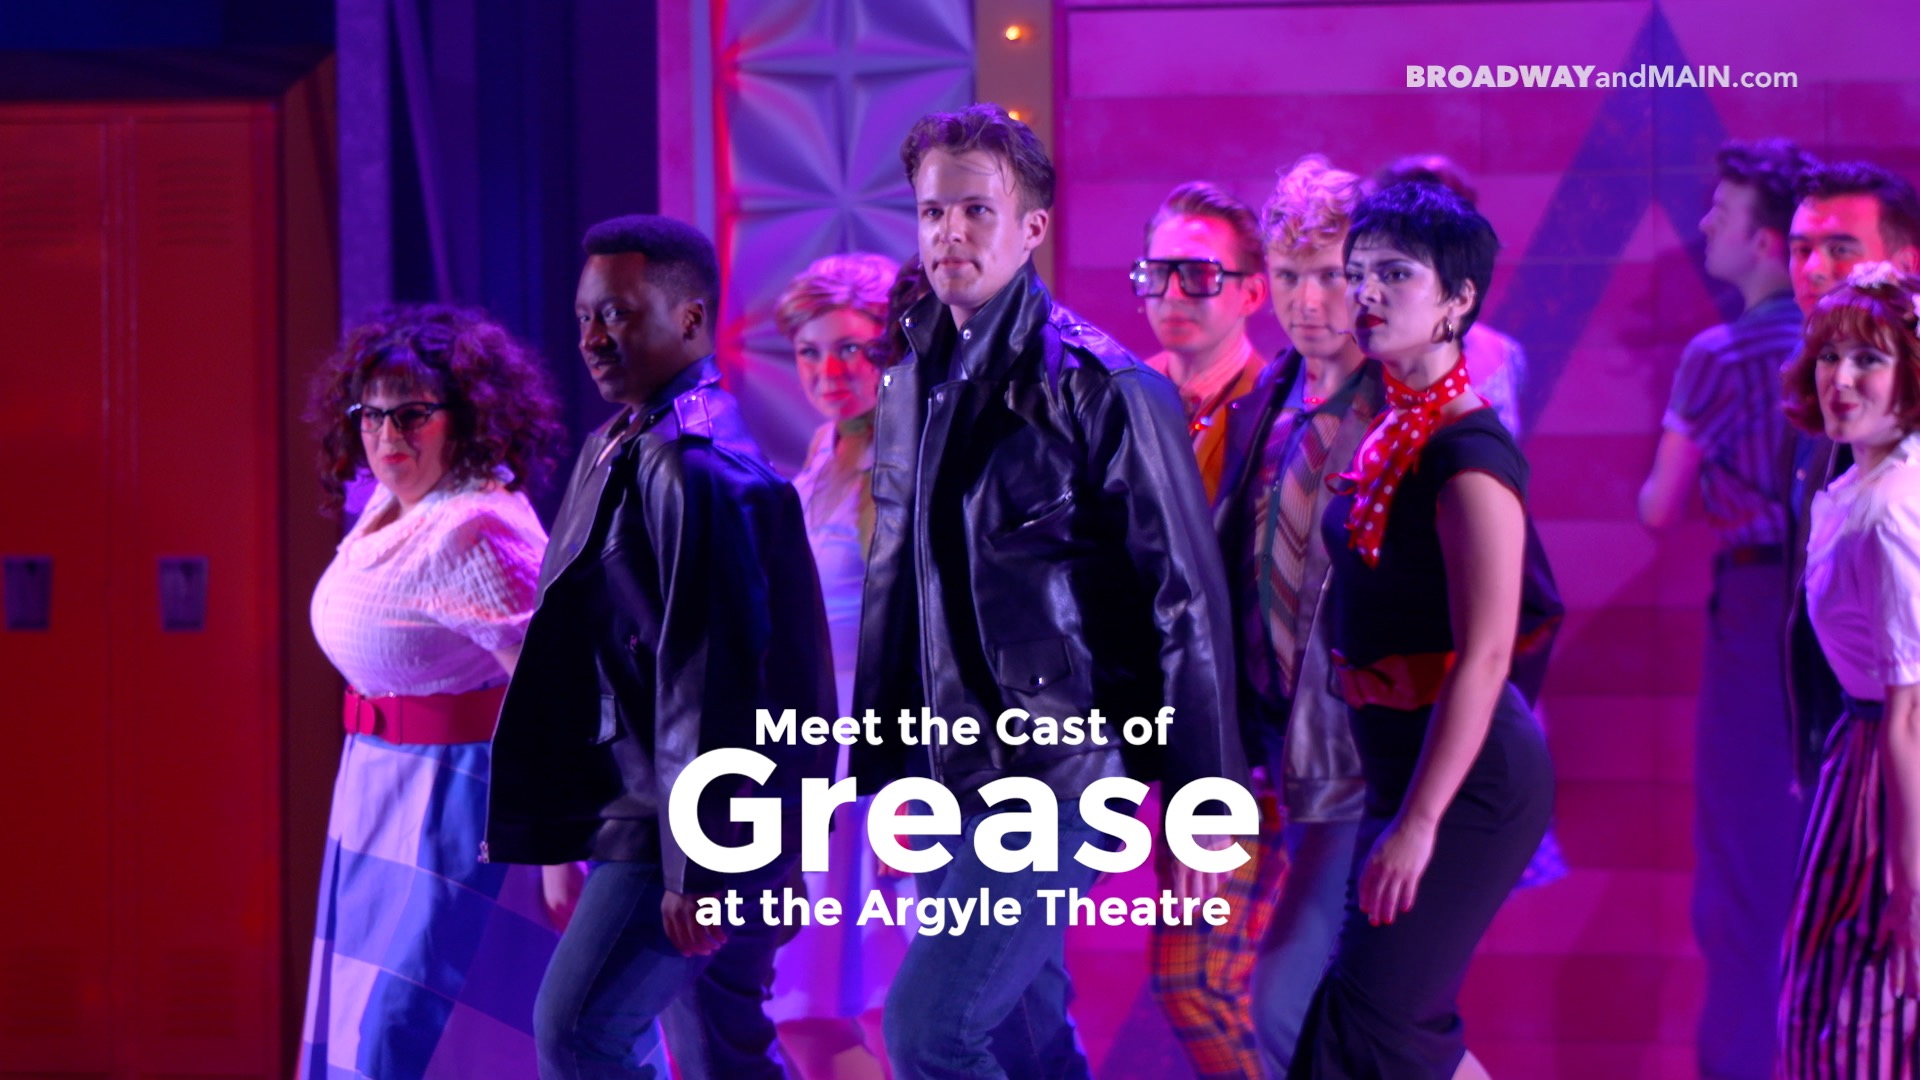 Meet The Cast of Grease at the Argyle Theatre